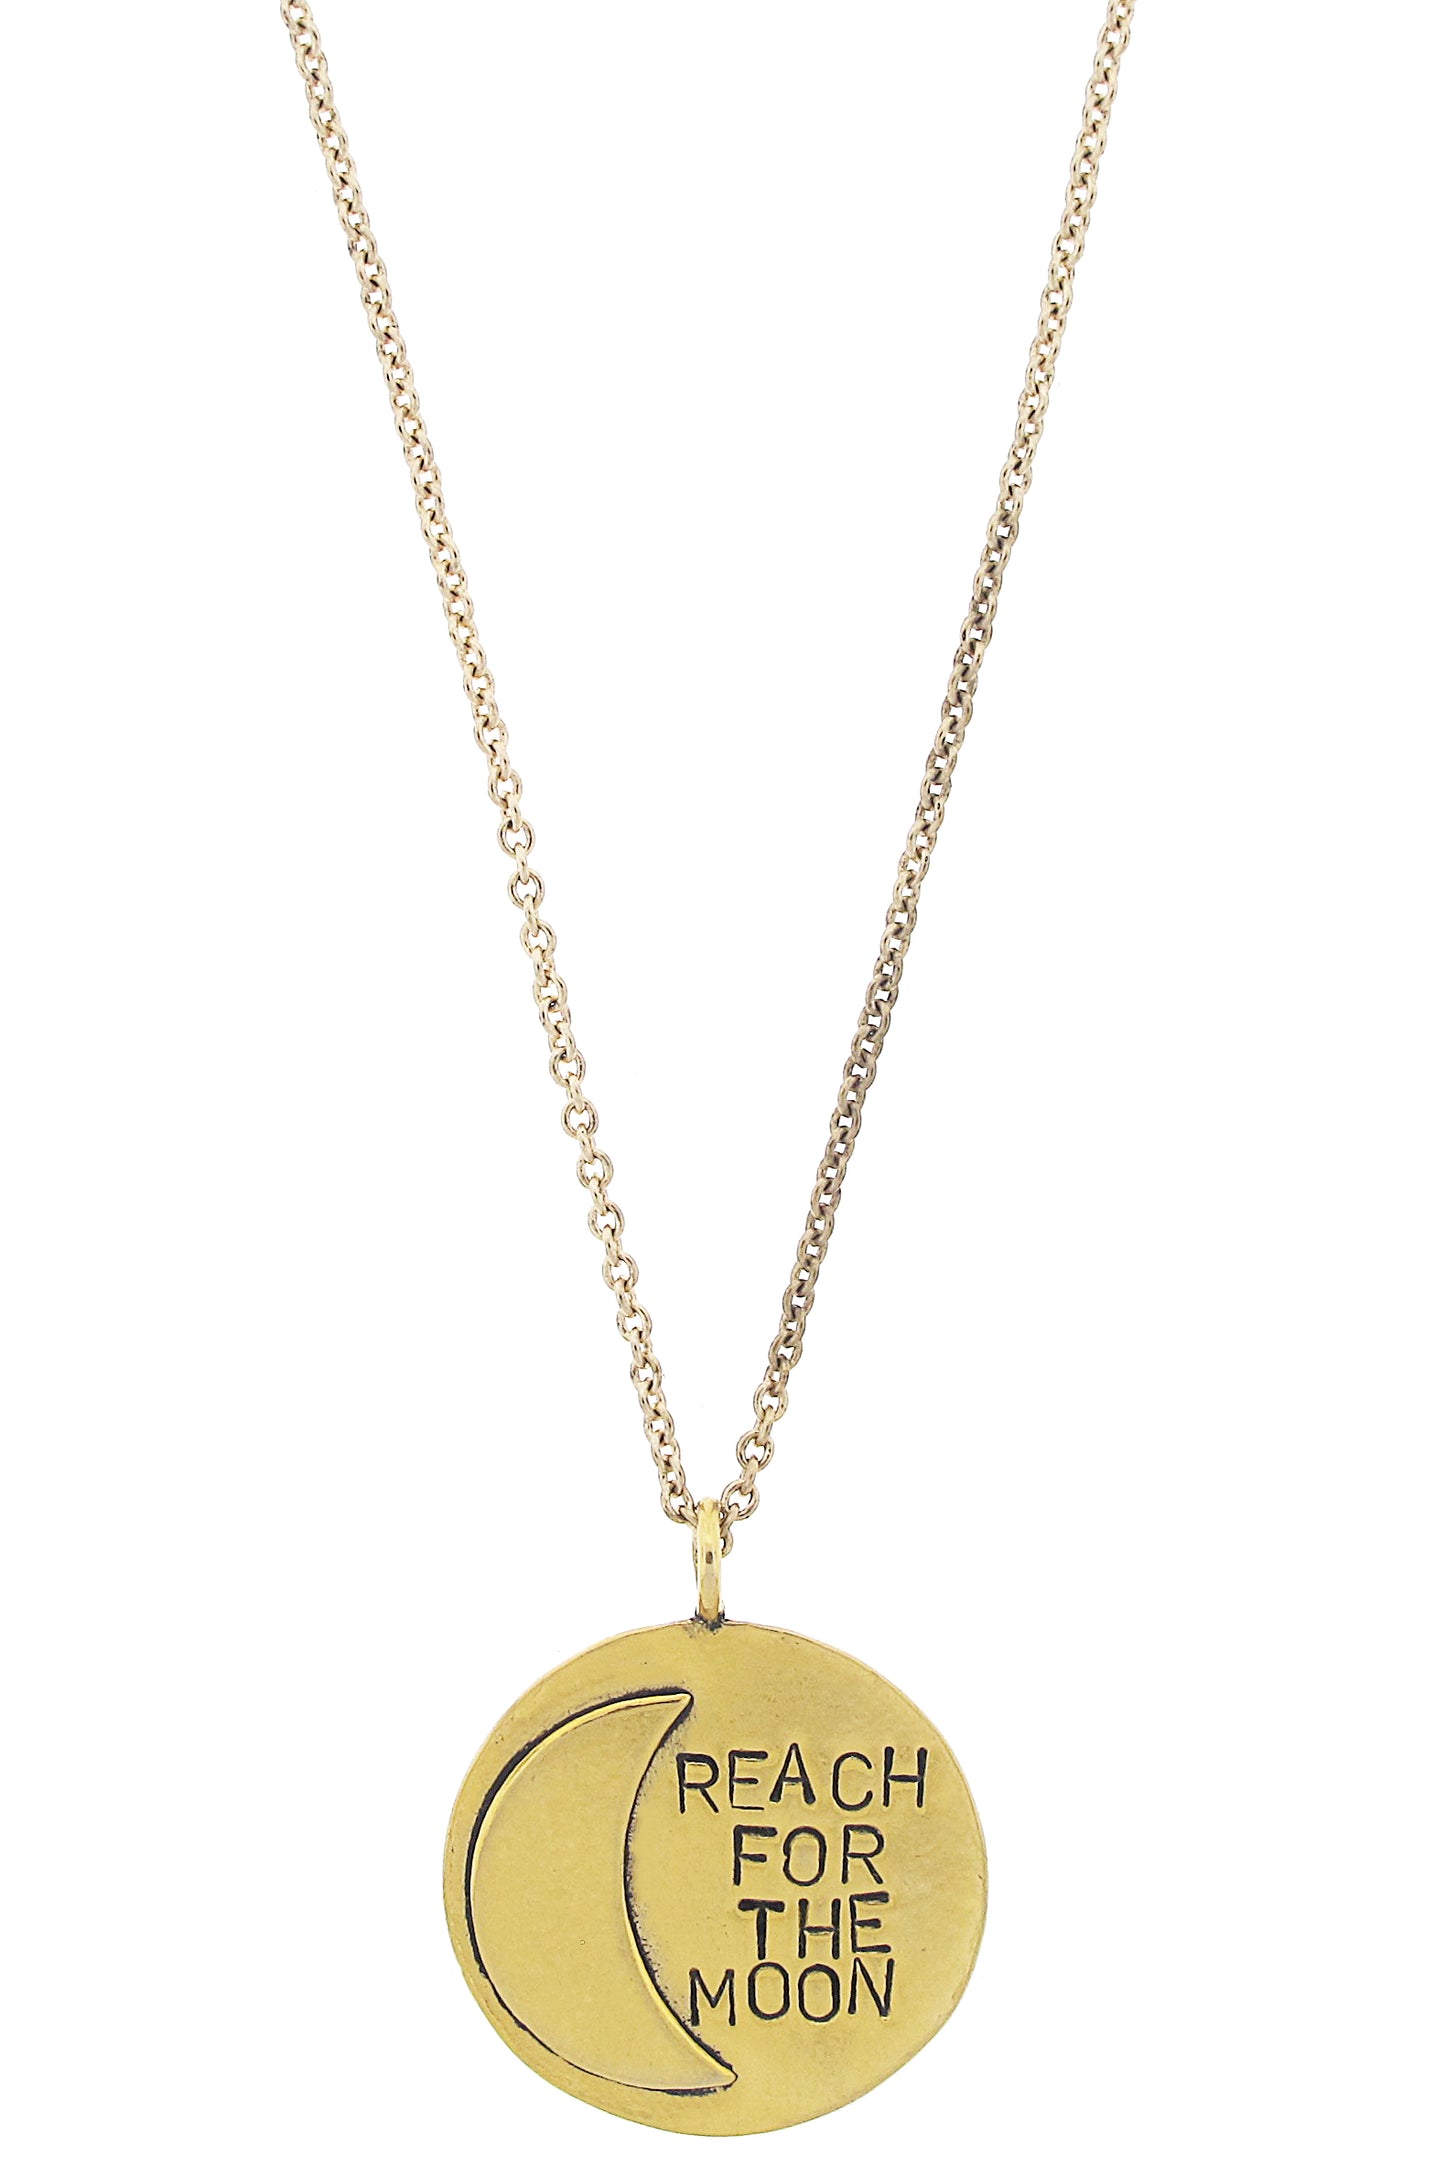 Reach For The Moon Hand Stamped Necklace